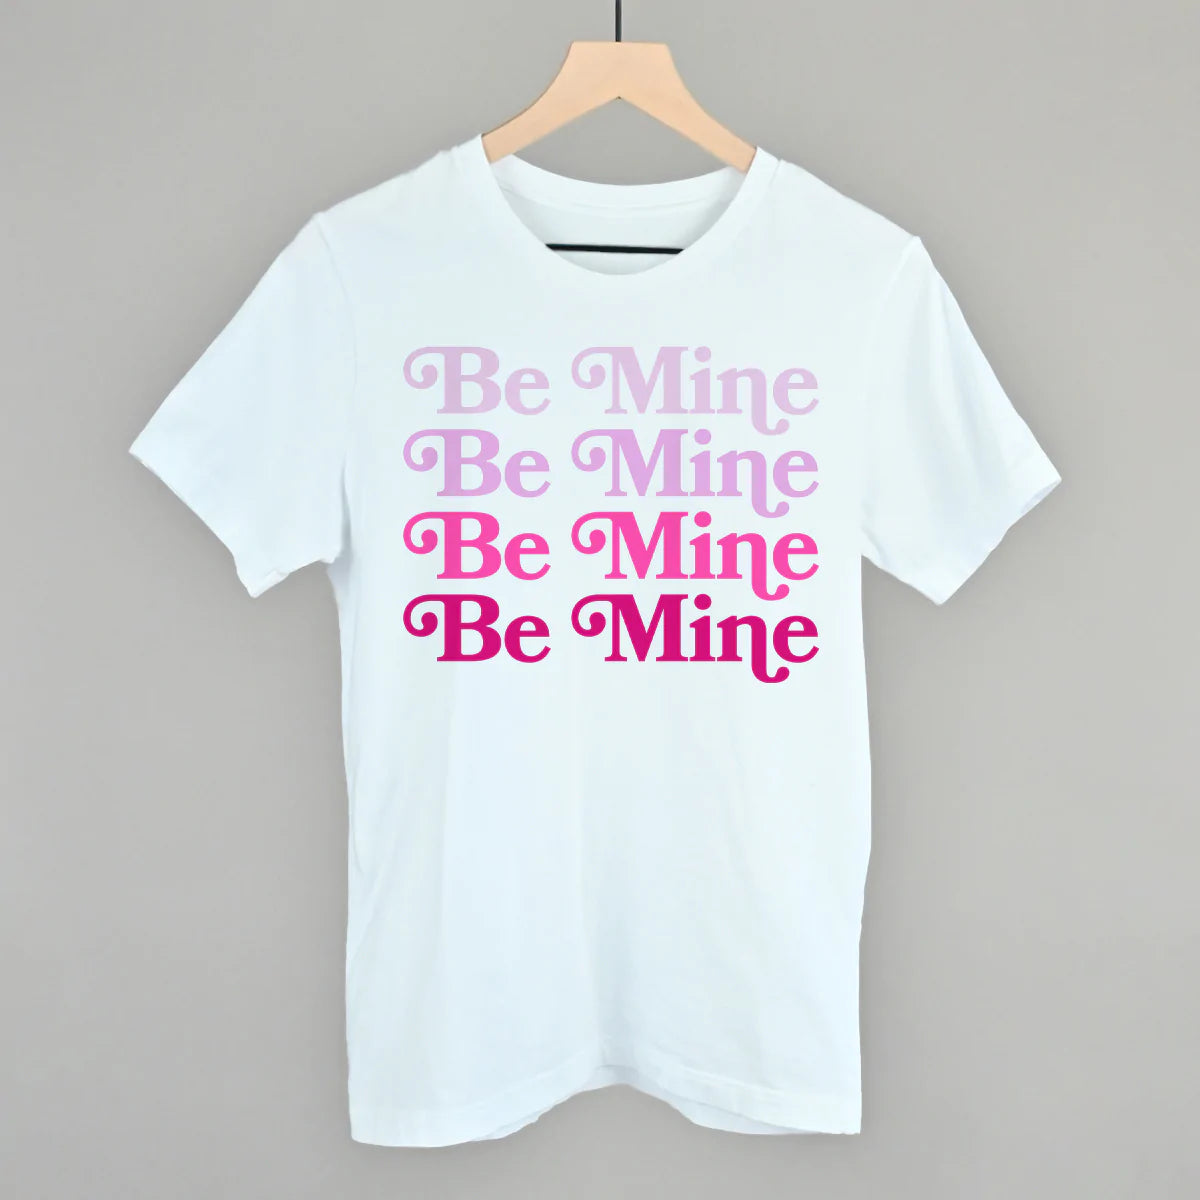 Be Mine (Repeated)